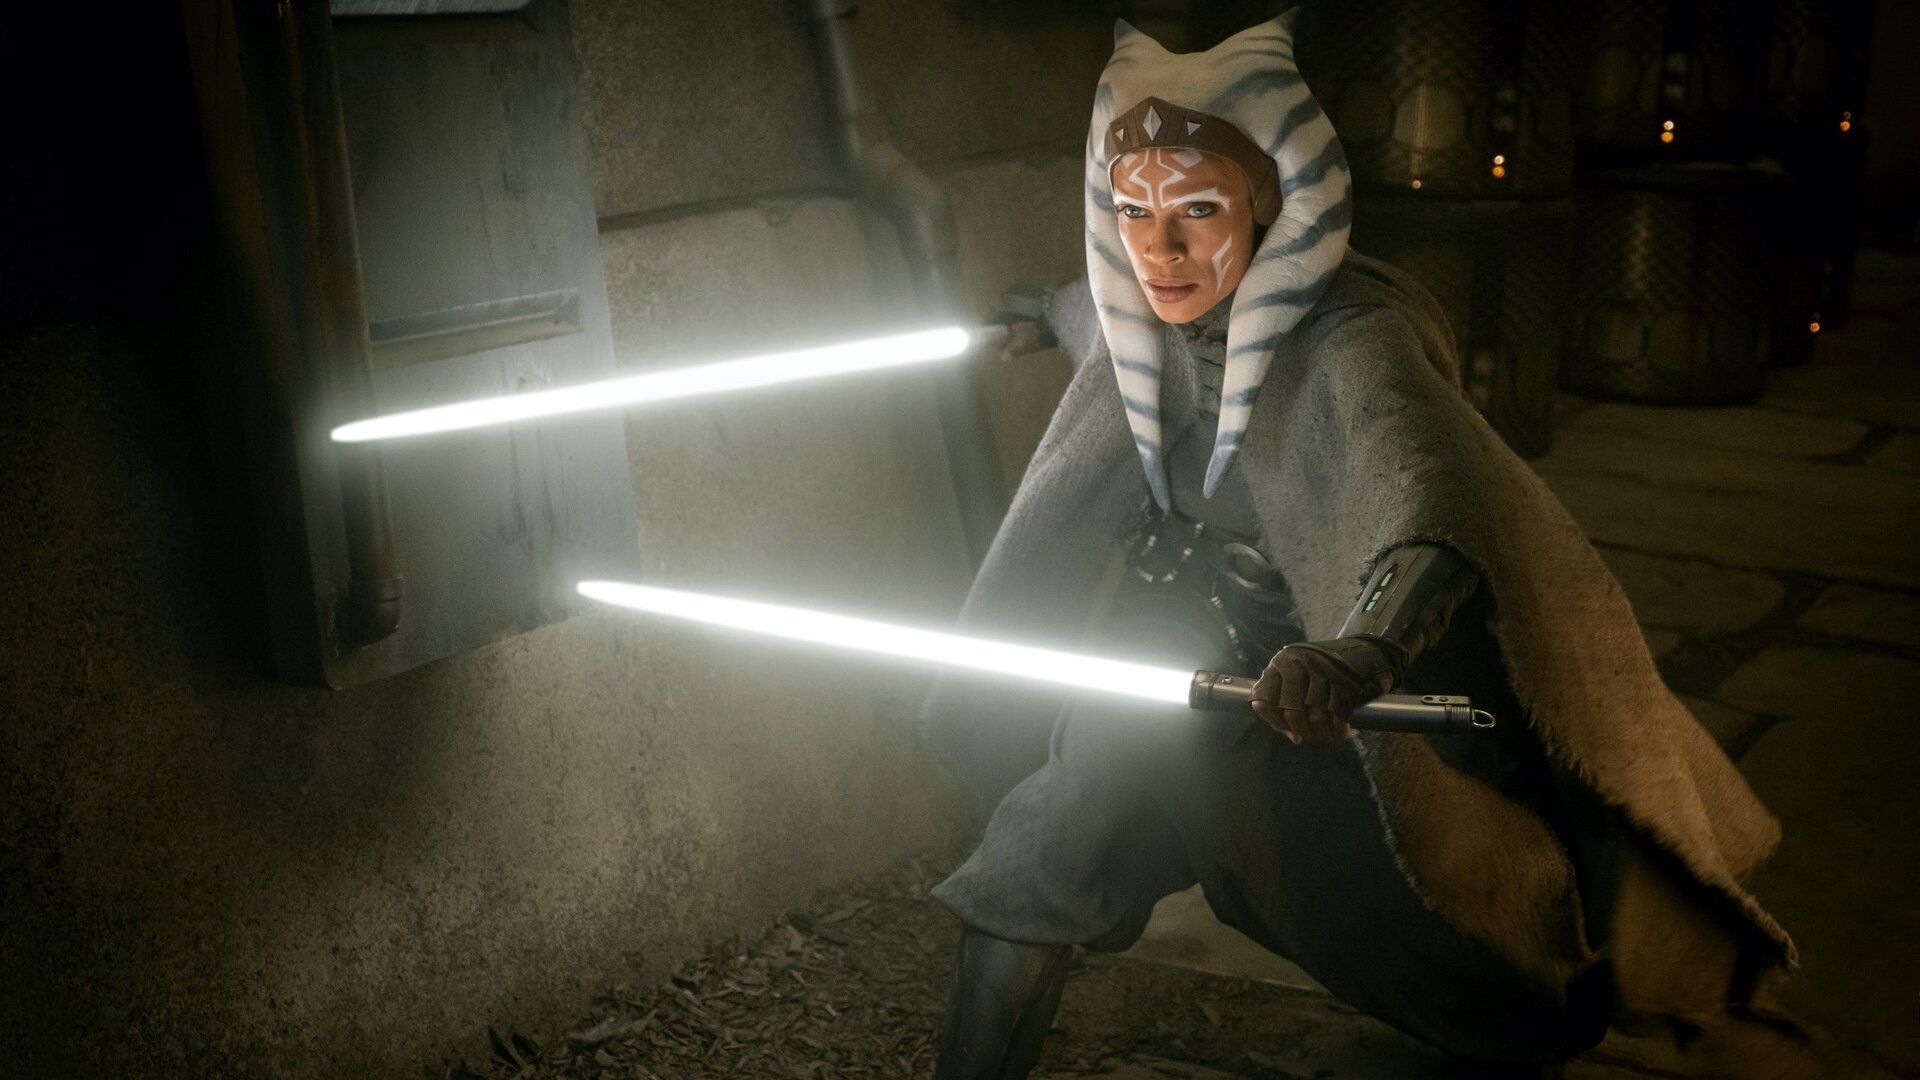 Let's Talk About THE MANDALORIAN Chapter 13 The Jedi Which Features Ahsoka Tano in Action!